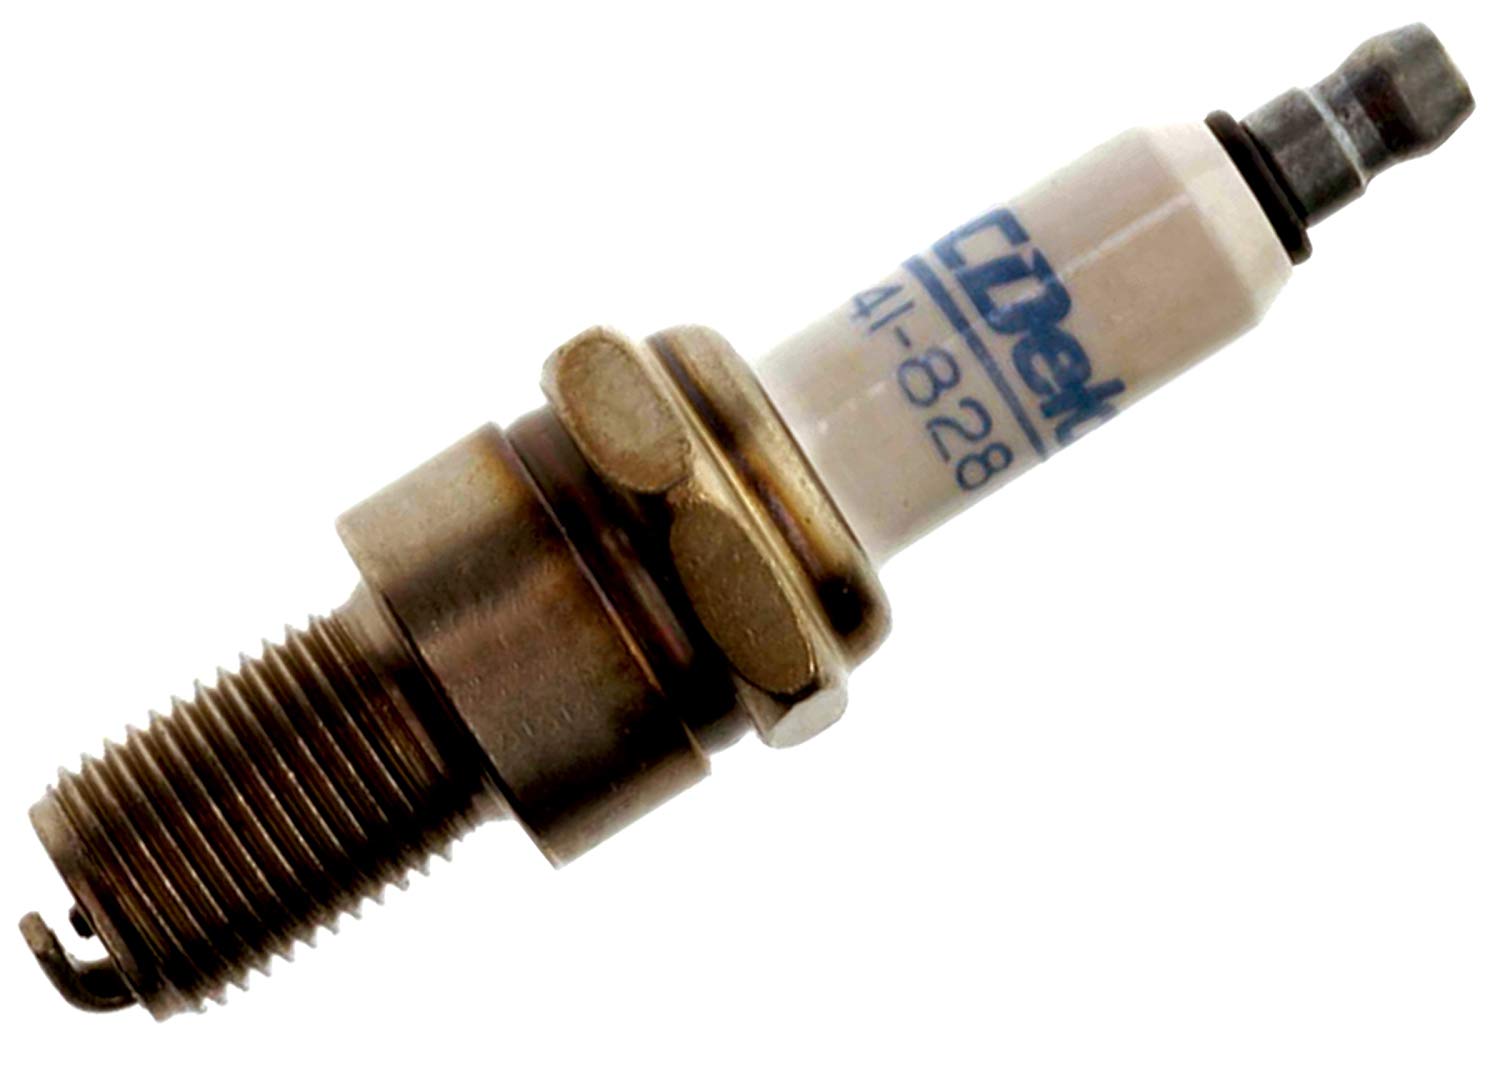 Acdelco double platinum spark plug 41-806 ratings 2016